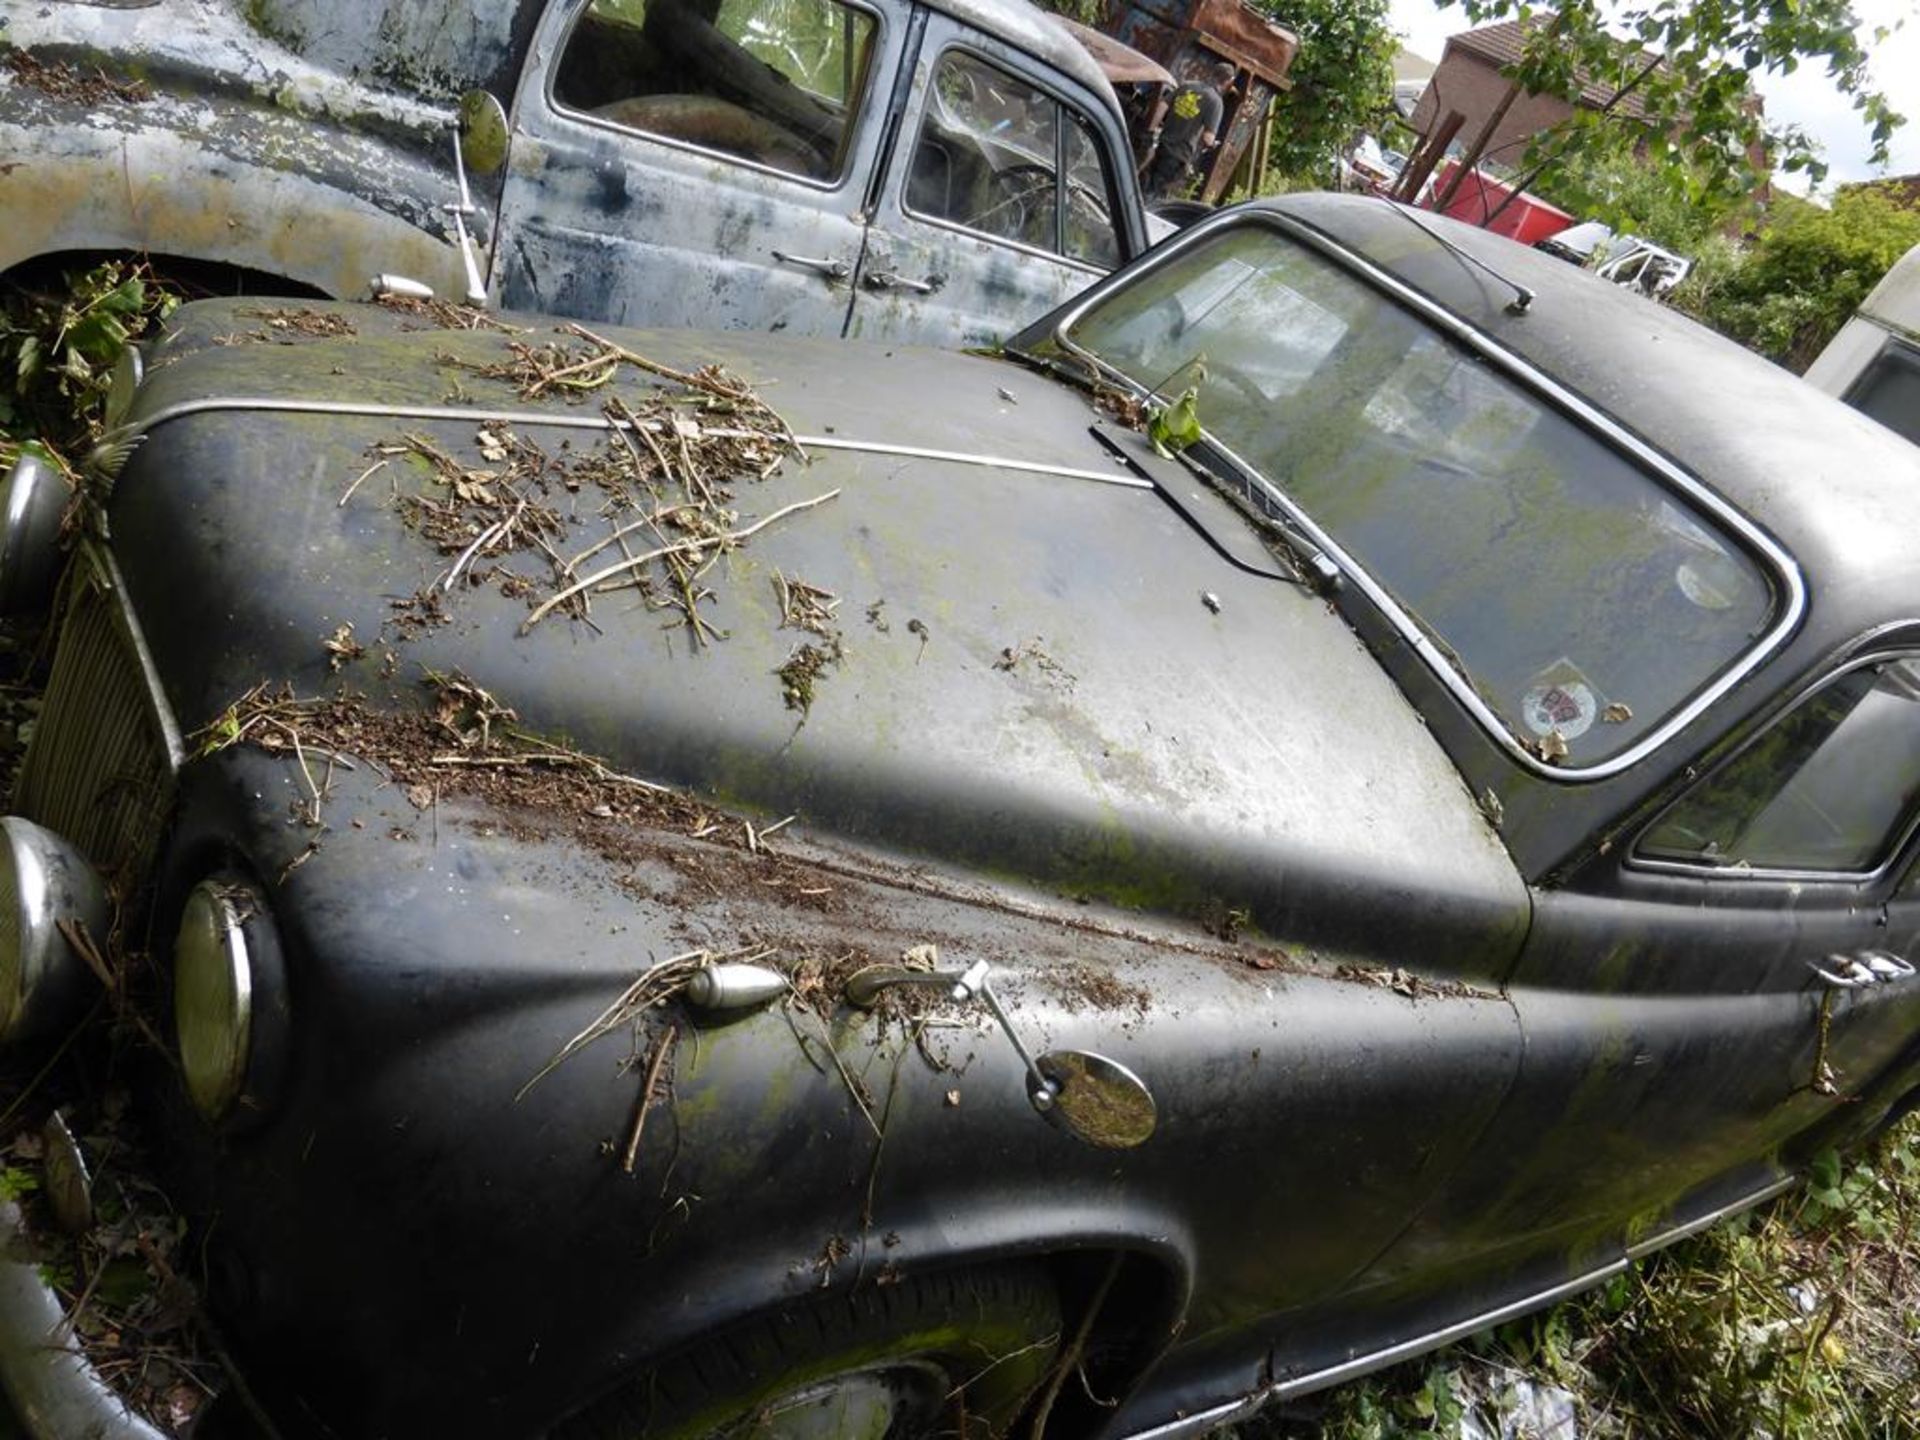 A Rover P4 (in need of restoration) - Image 2 of 15